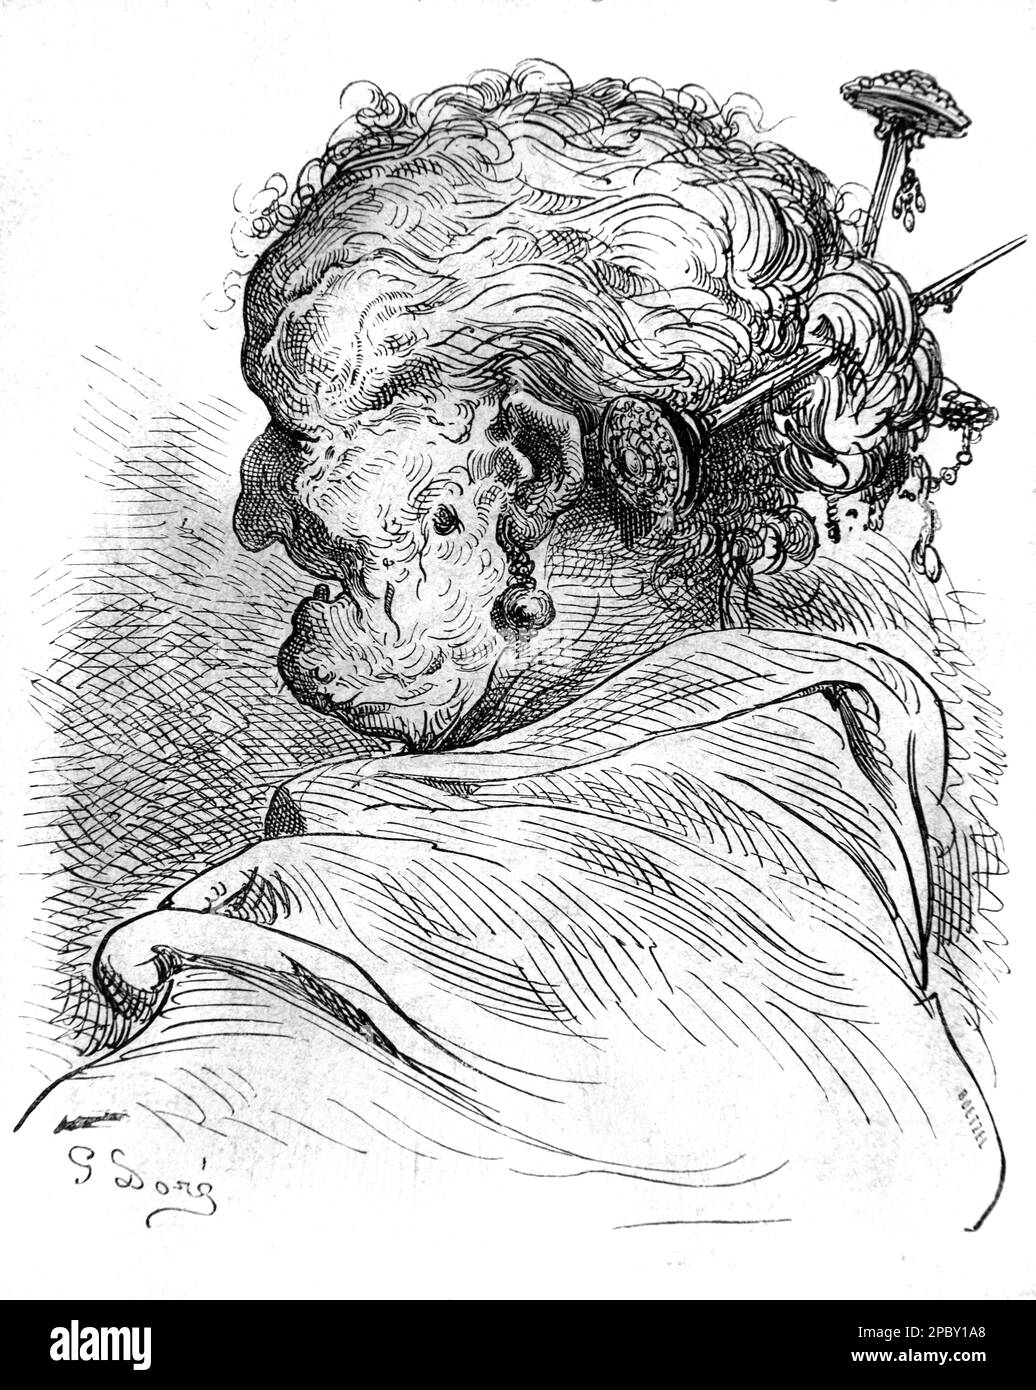 Portrait of Old Spanish Woman from Valence Spain. Vintage or Historic Engraving or Illustration by Gustave Doré 1862 Stock Photo